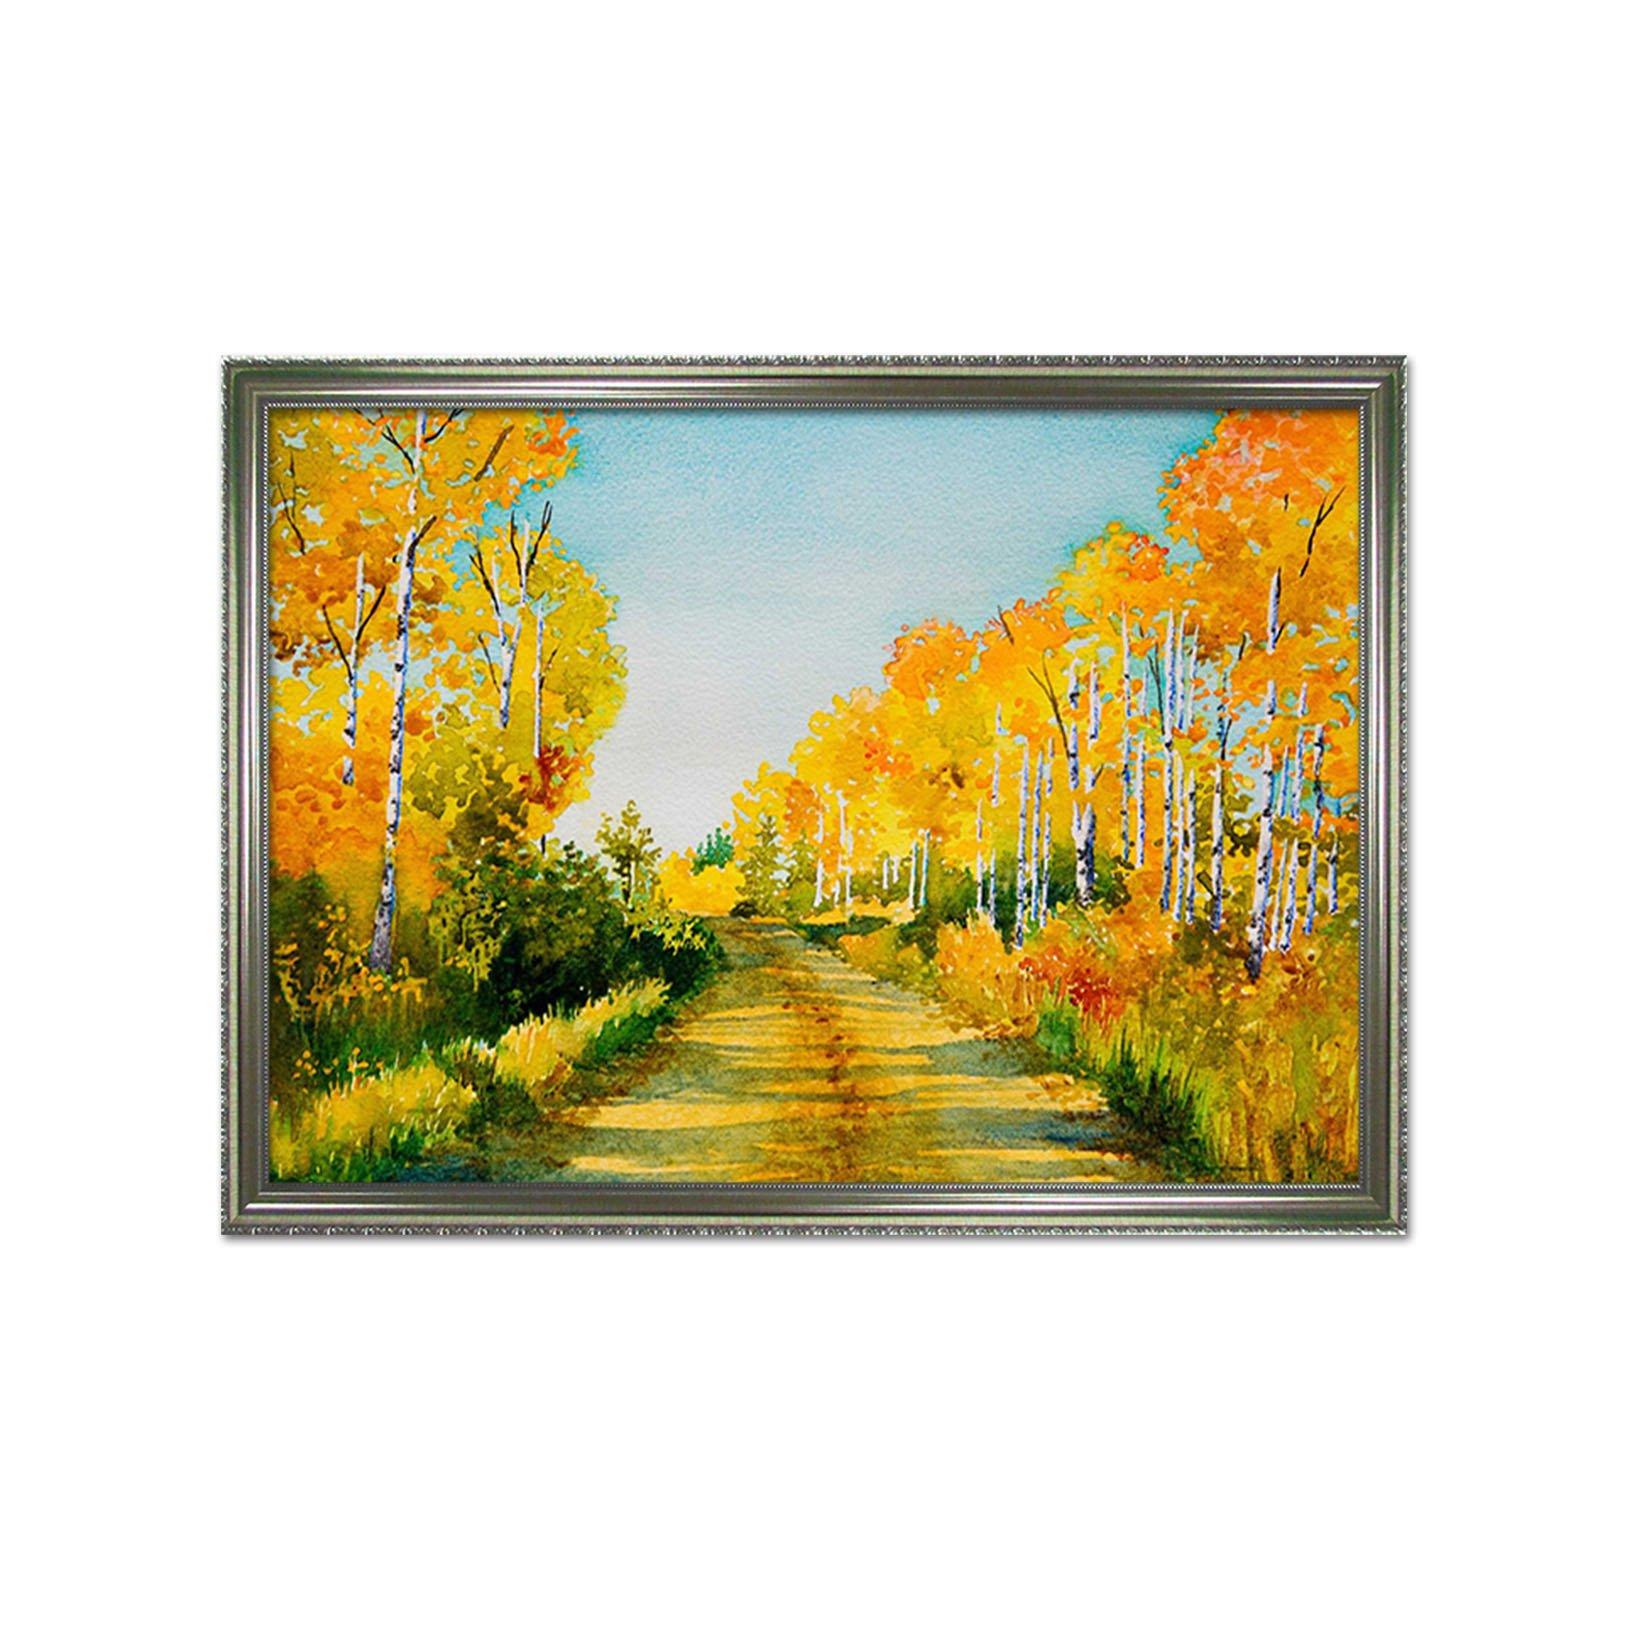 3D Country Road 167 Fake Framed Print Painting Wallpaper AJ Creativity Home 